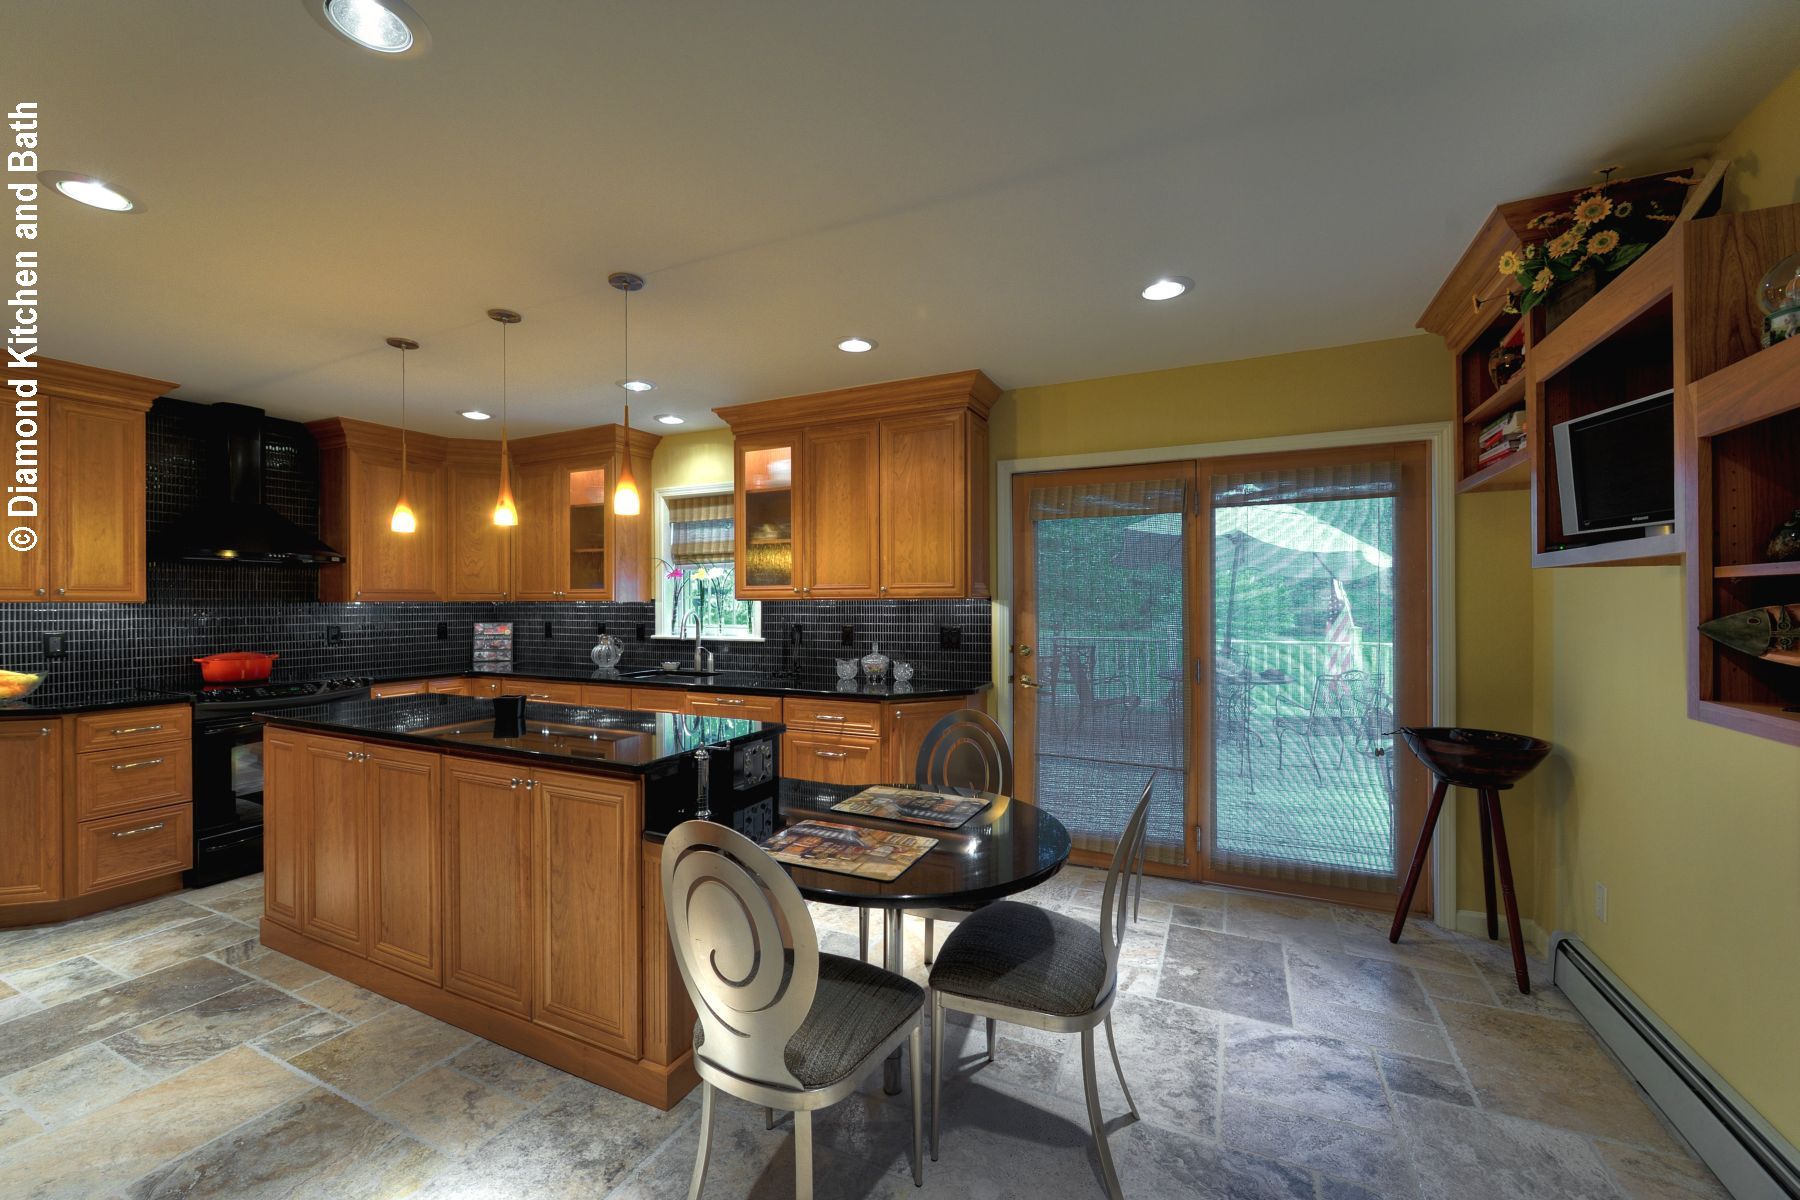 Kitchen Remodeling Virtual Tour in Wrightstown, PA